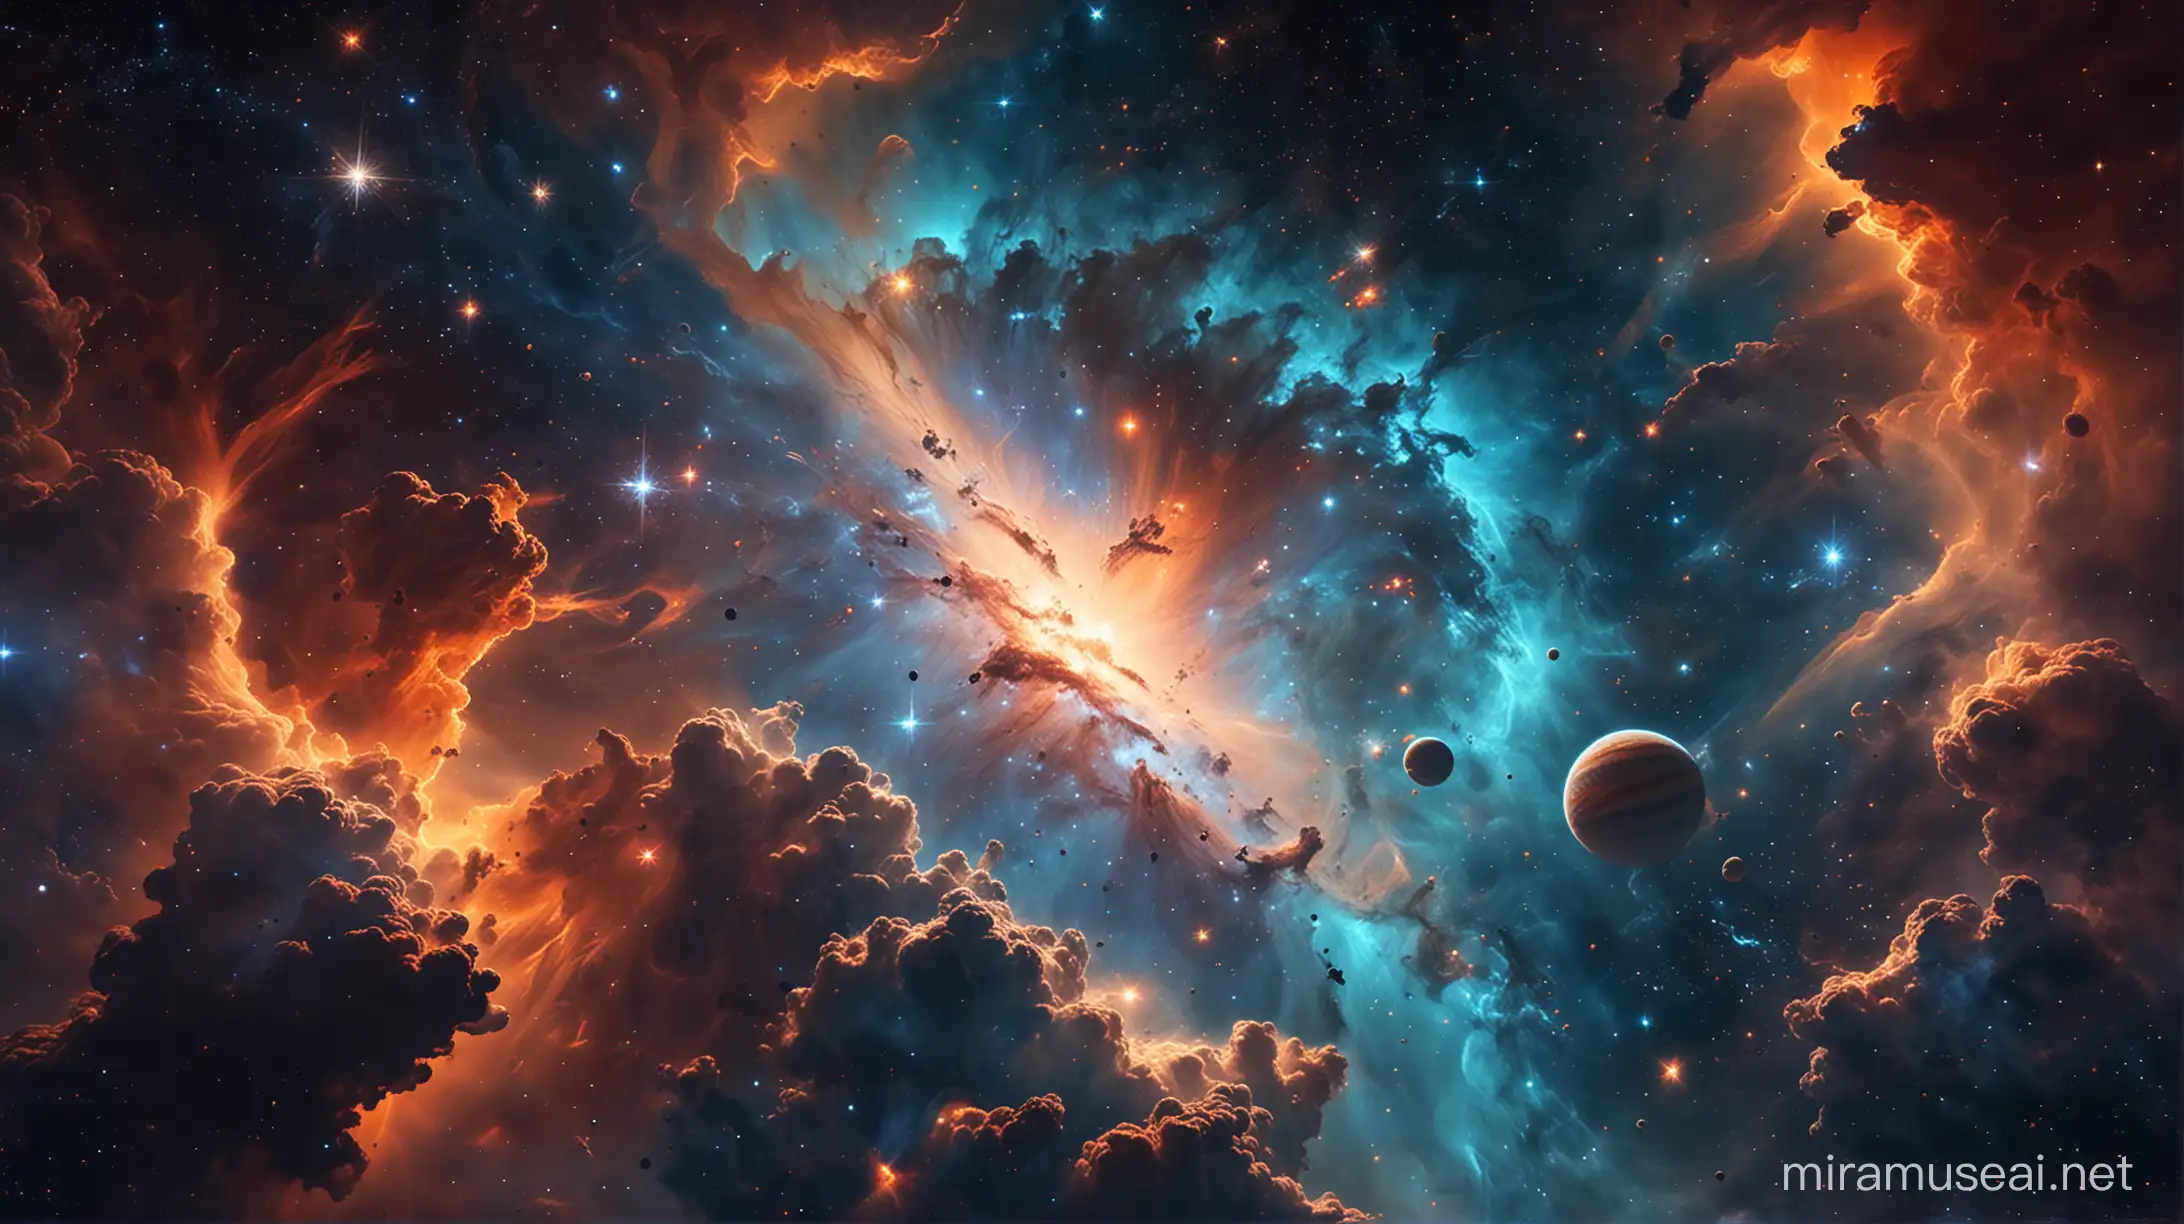 Cinematic View of Nebula Space with Planets and Stars in Orange and Blue Hue